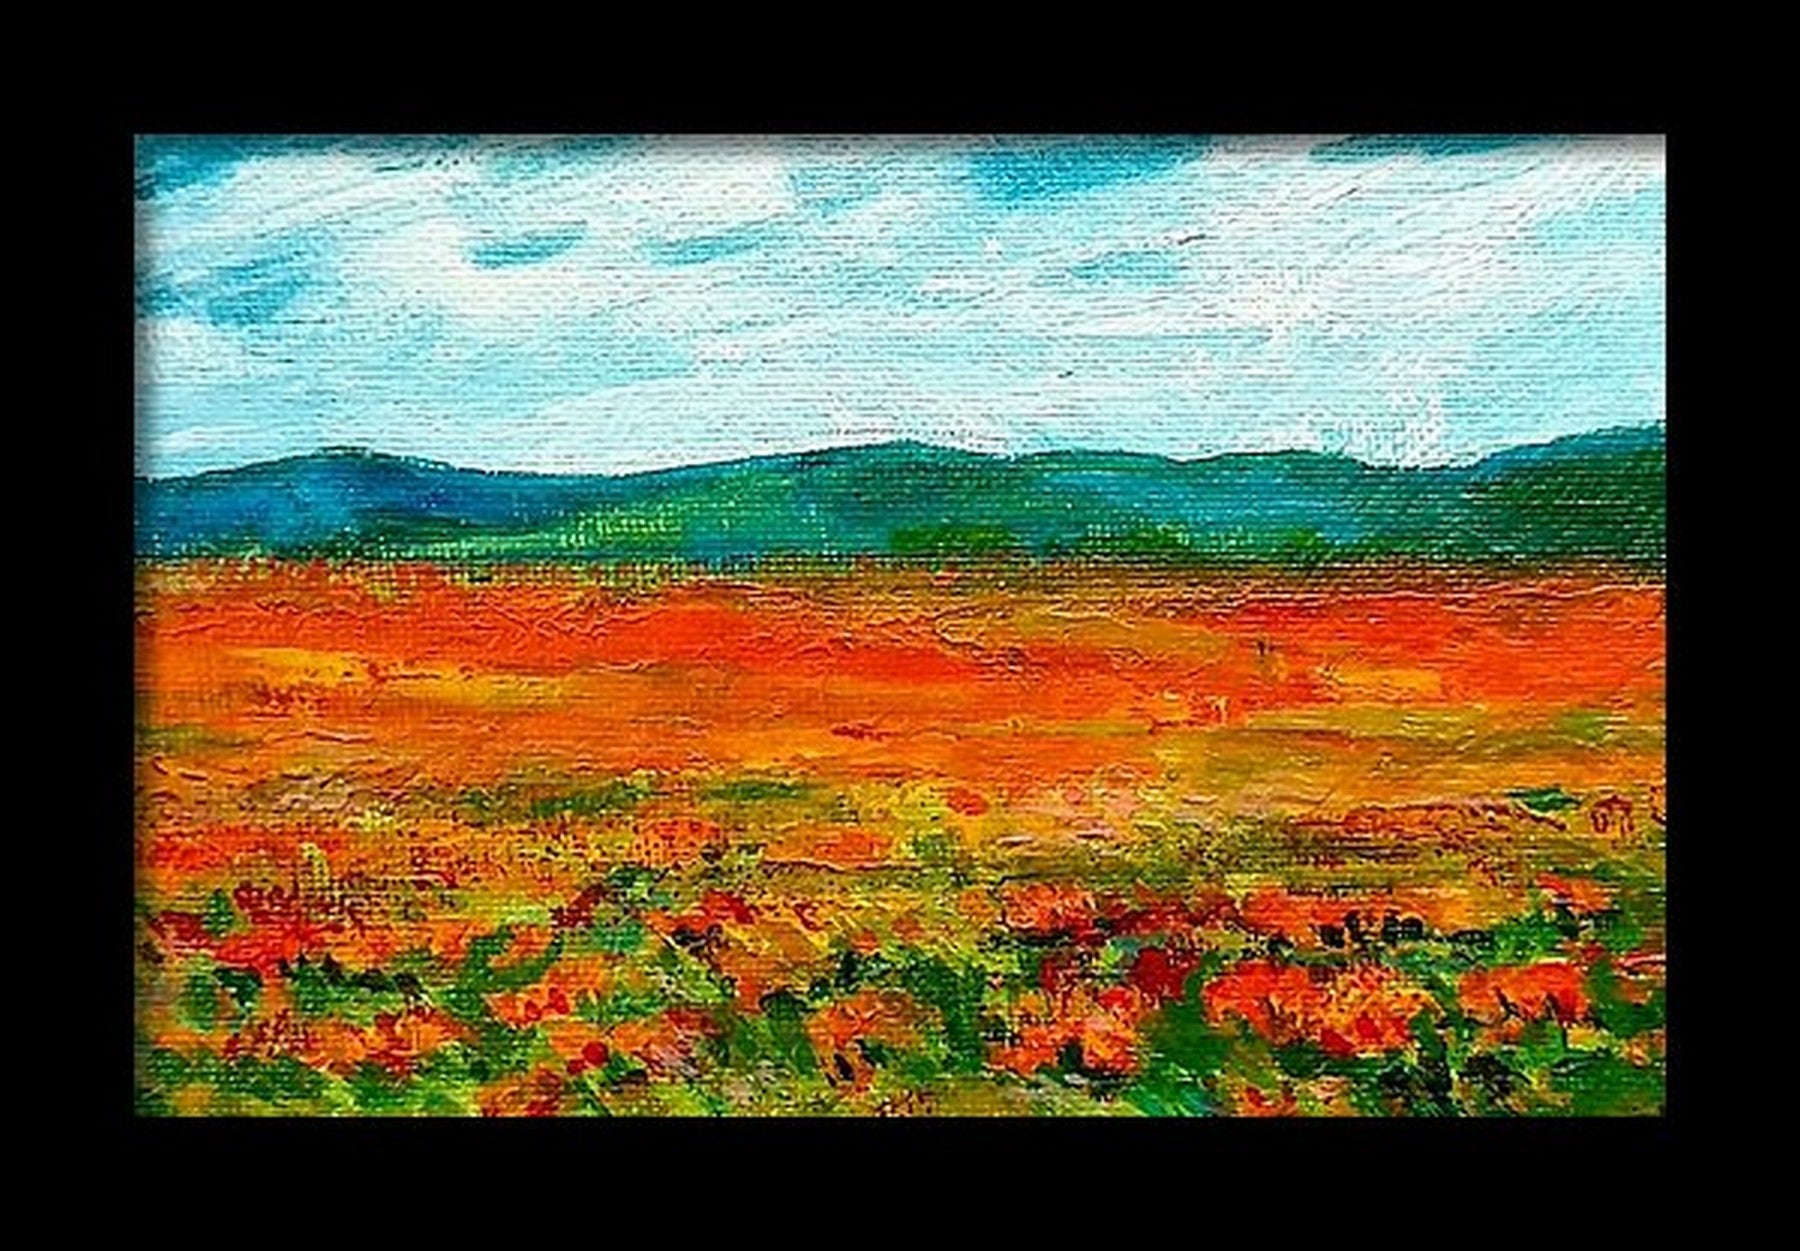 Blue hills and red poppies